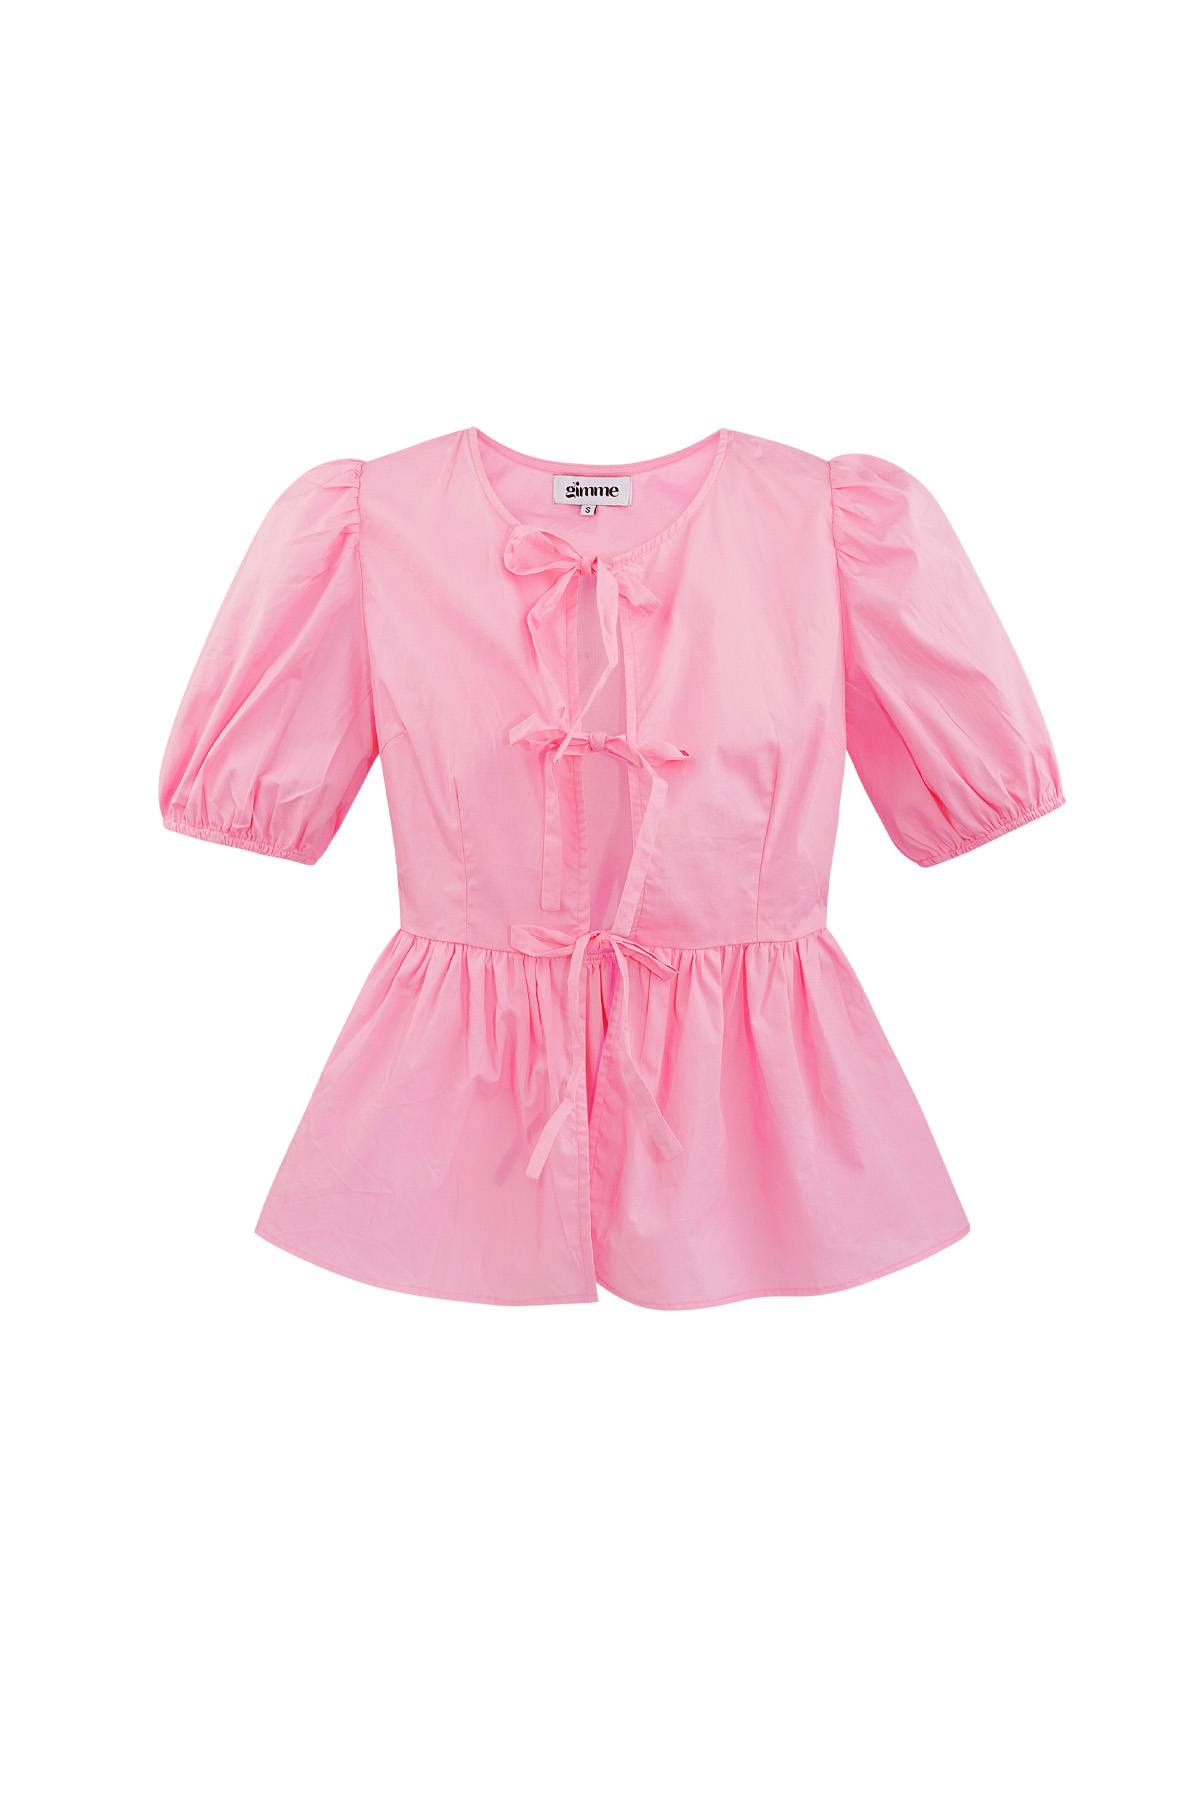 Must-have peplum blouse with bows - pink